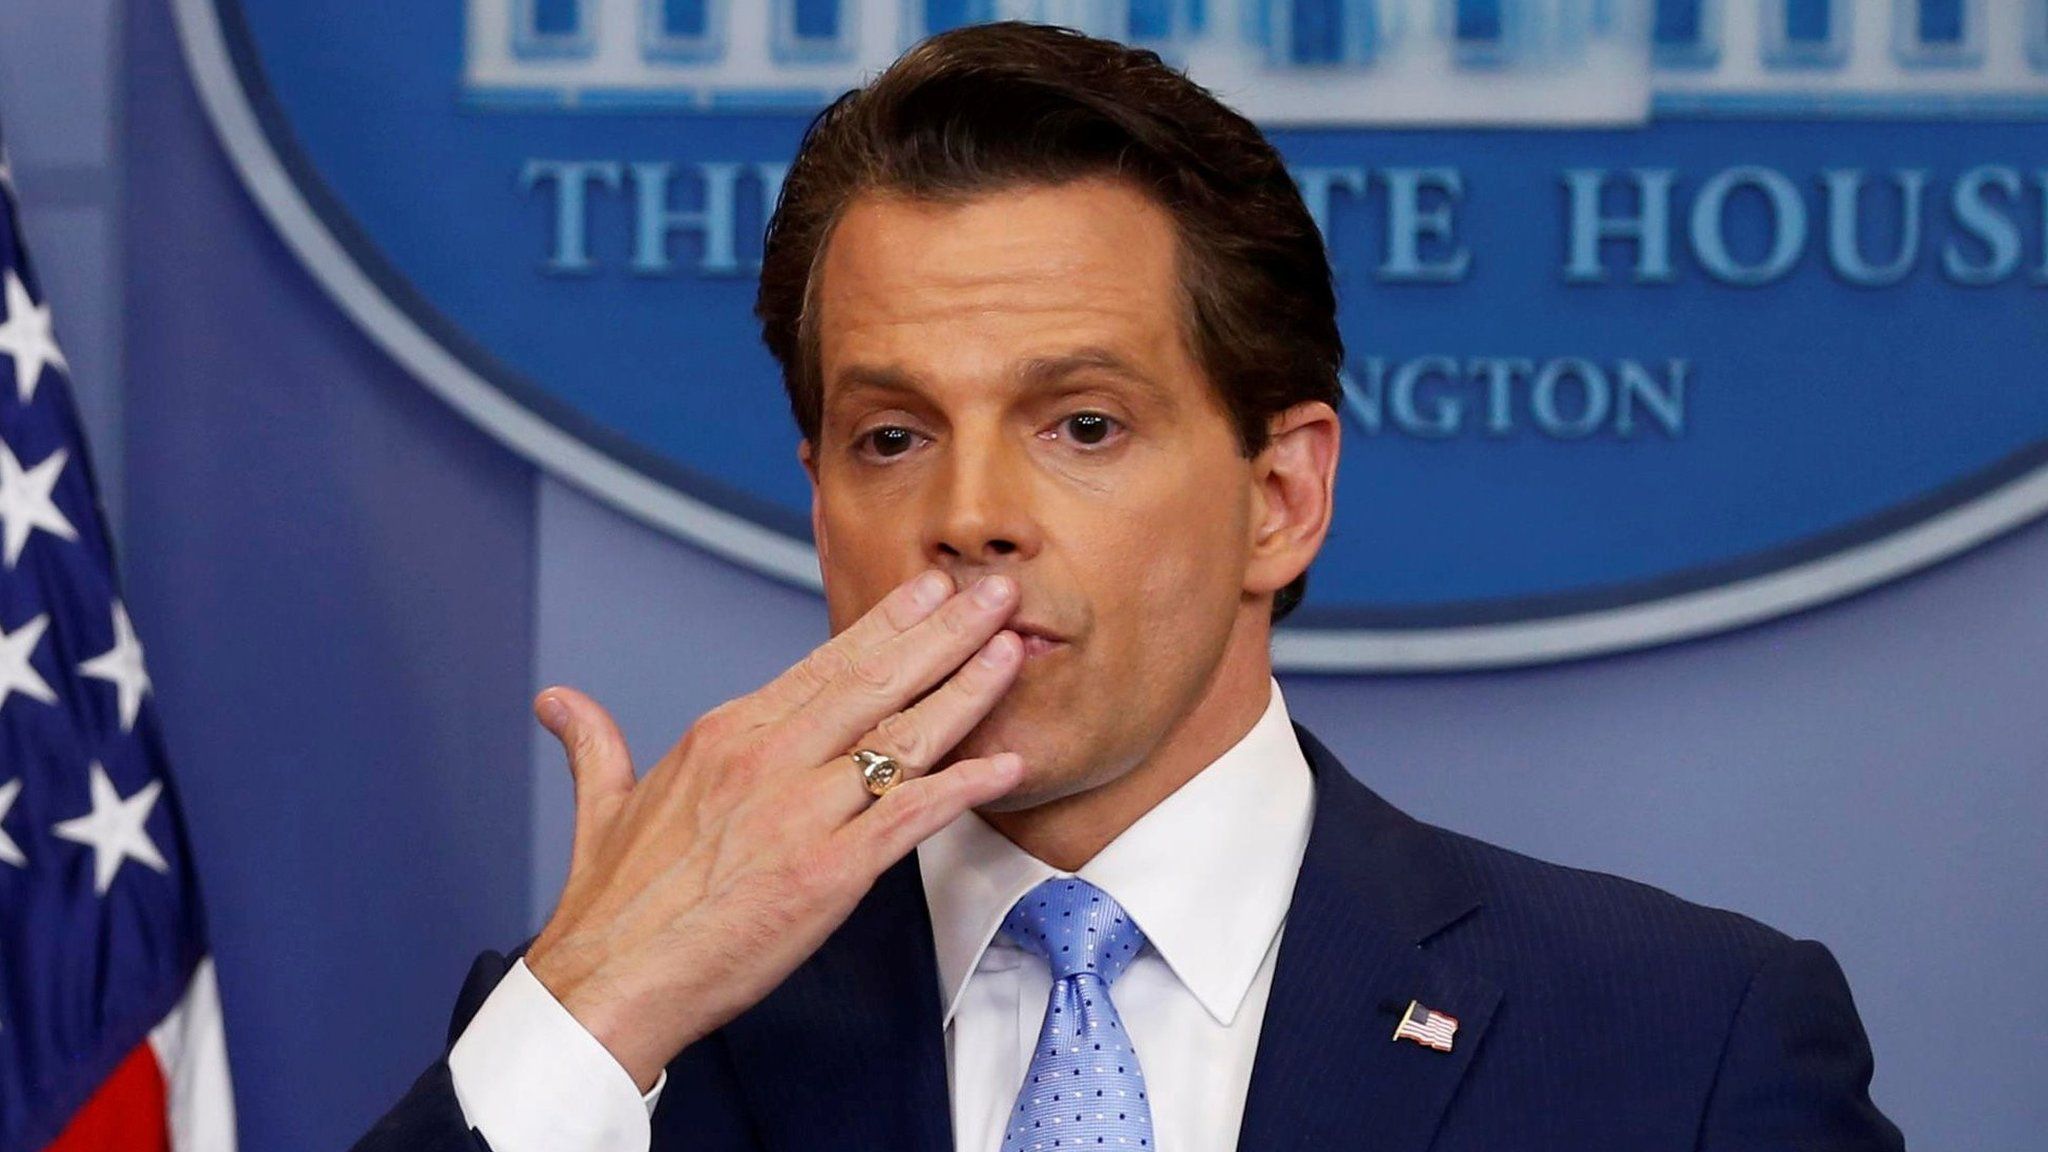 Scaramucci blows a kiss to reporters after addressing the daily briefing at the White House in Washington on 21 July